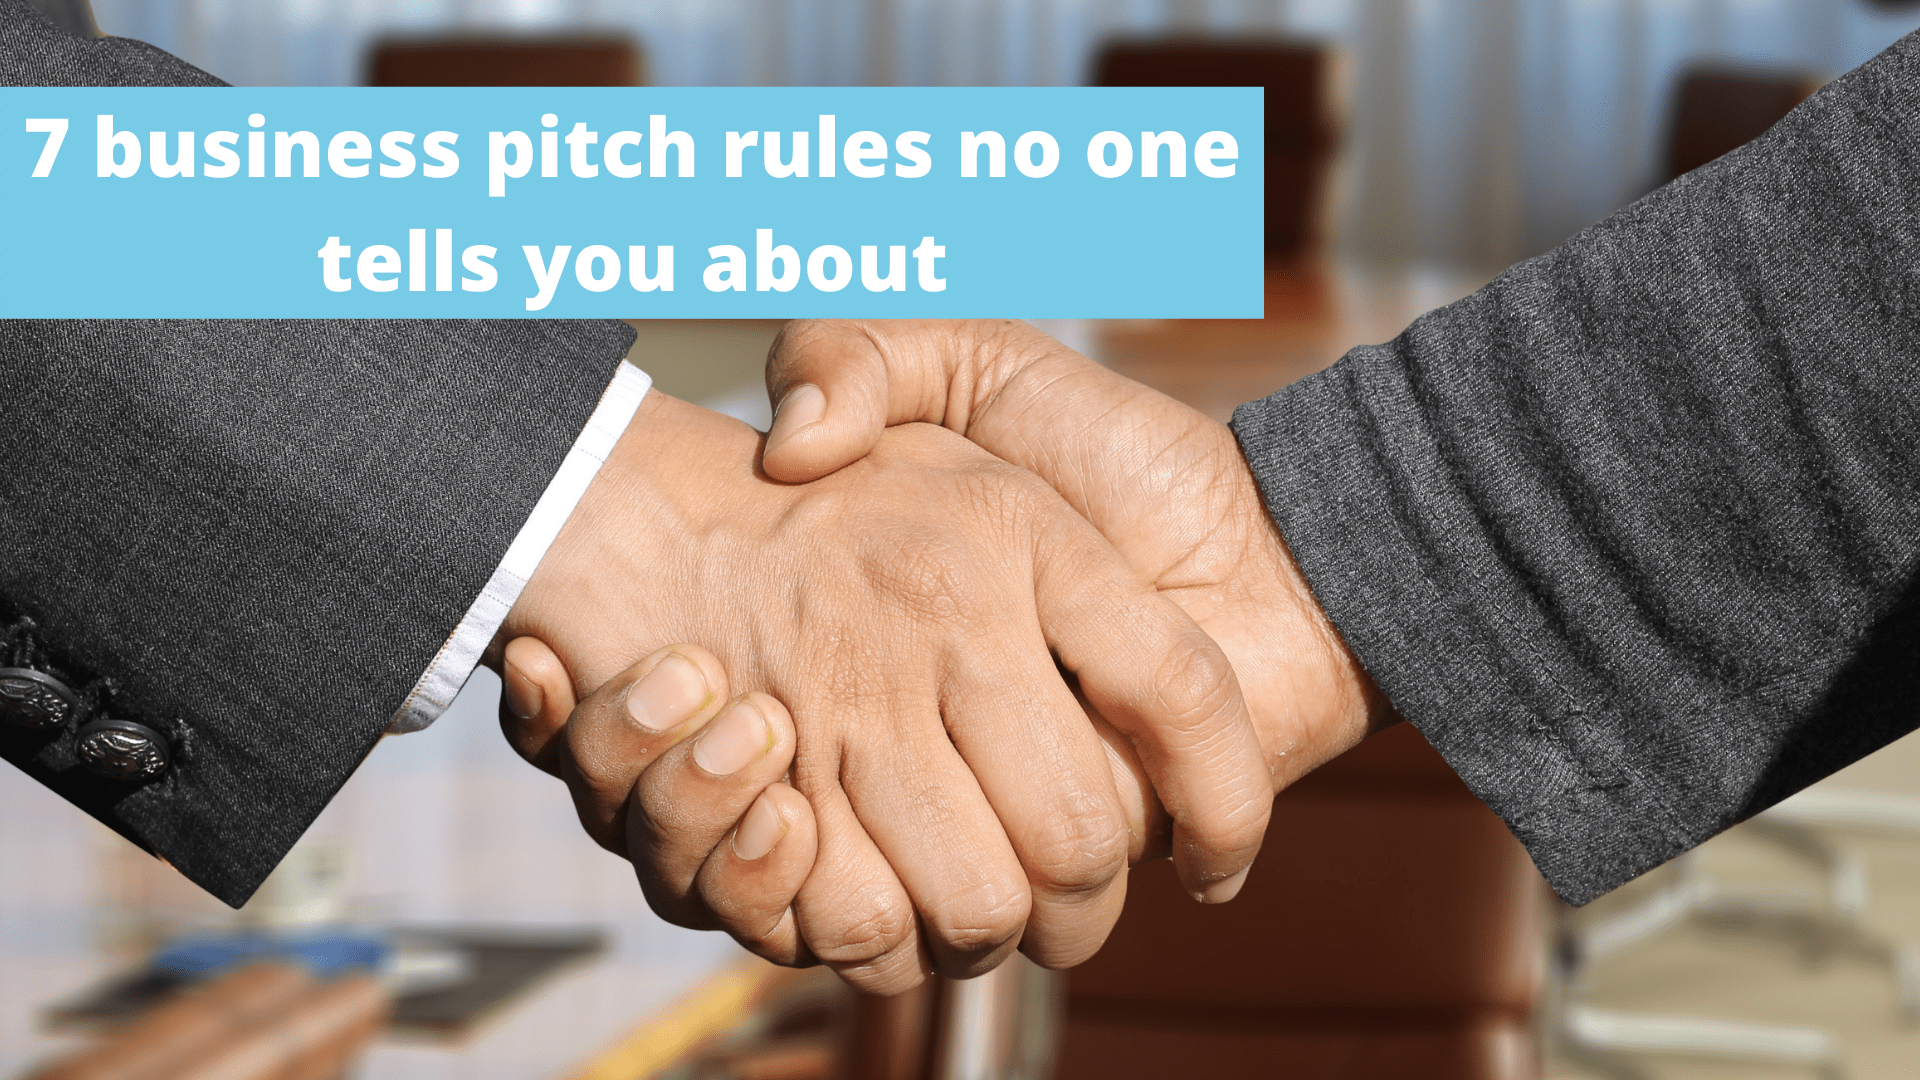 7 business pitch rules no one tells you about